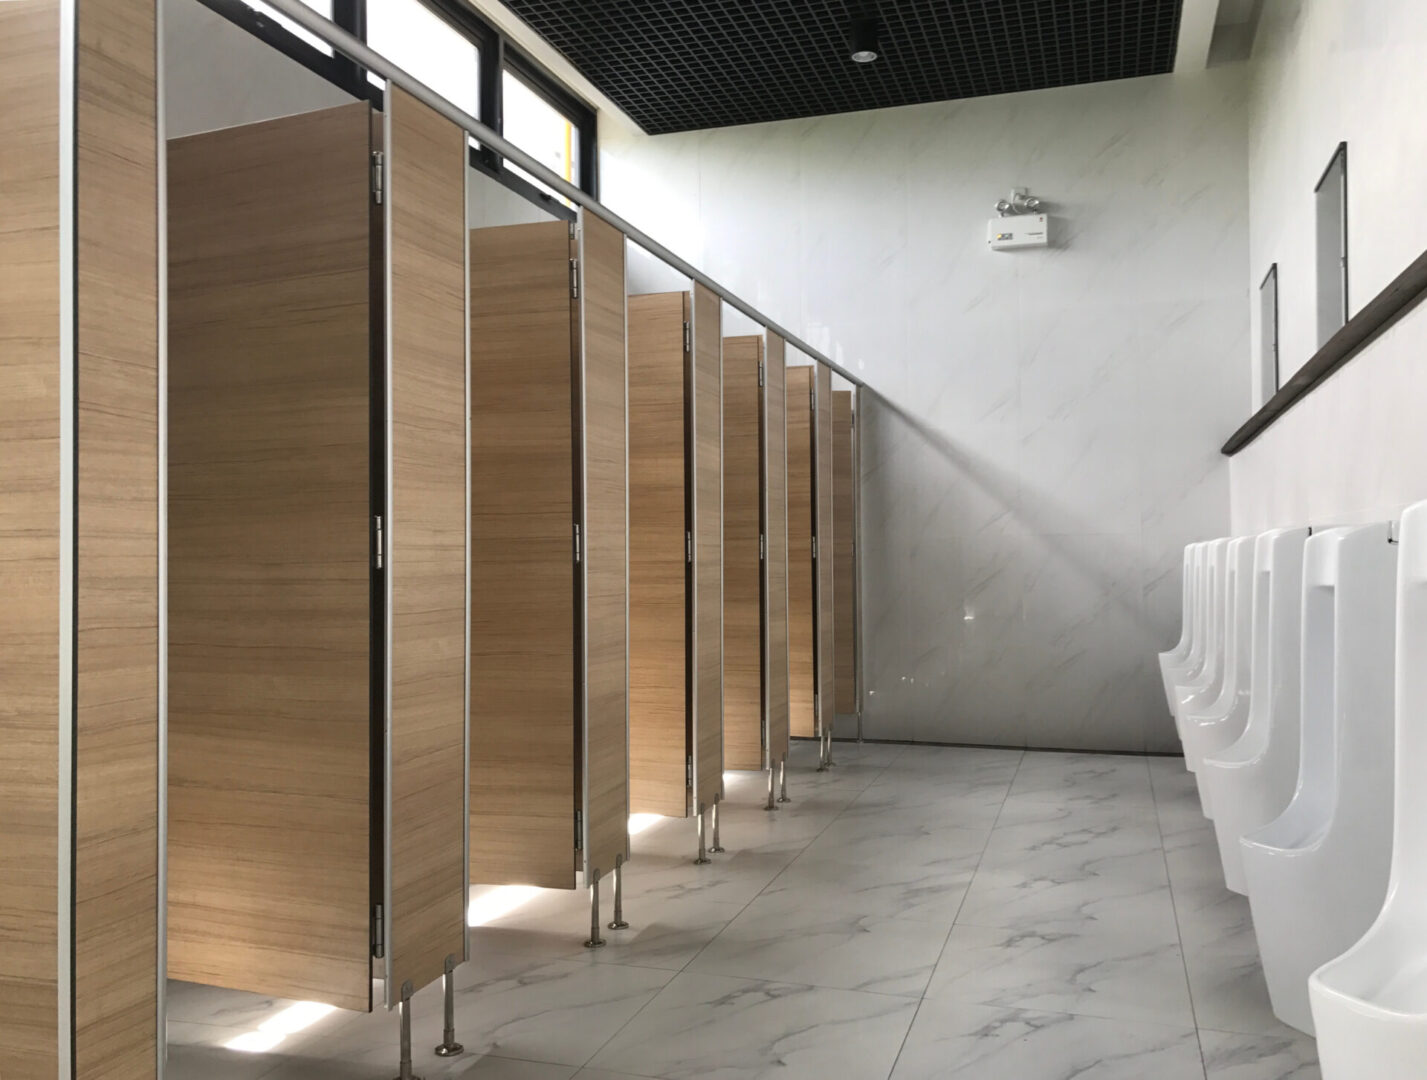 A row of wooden stalls in a bathroom.